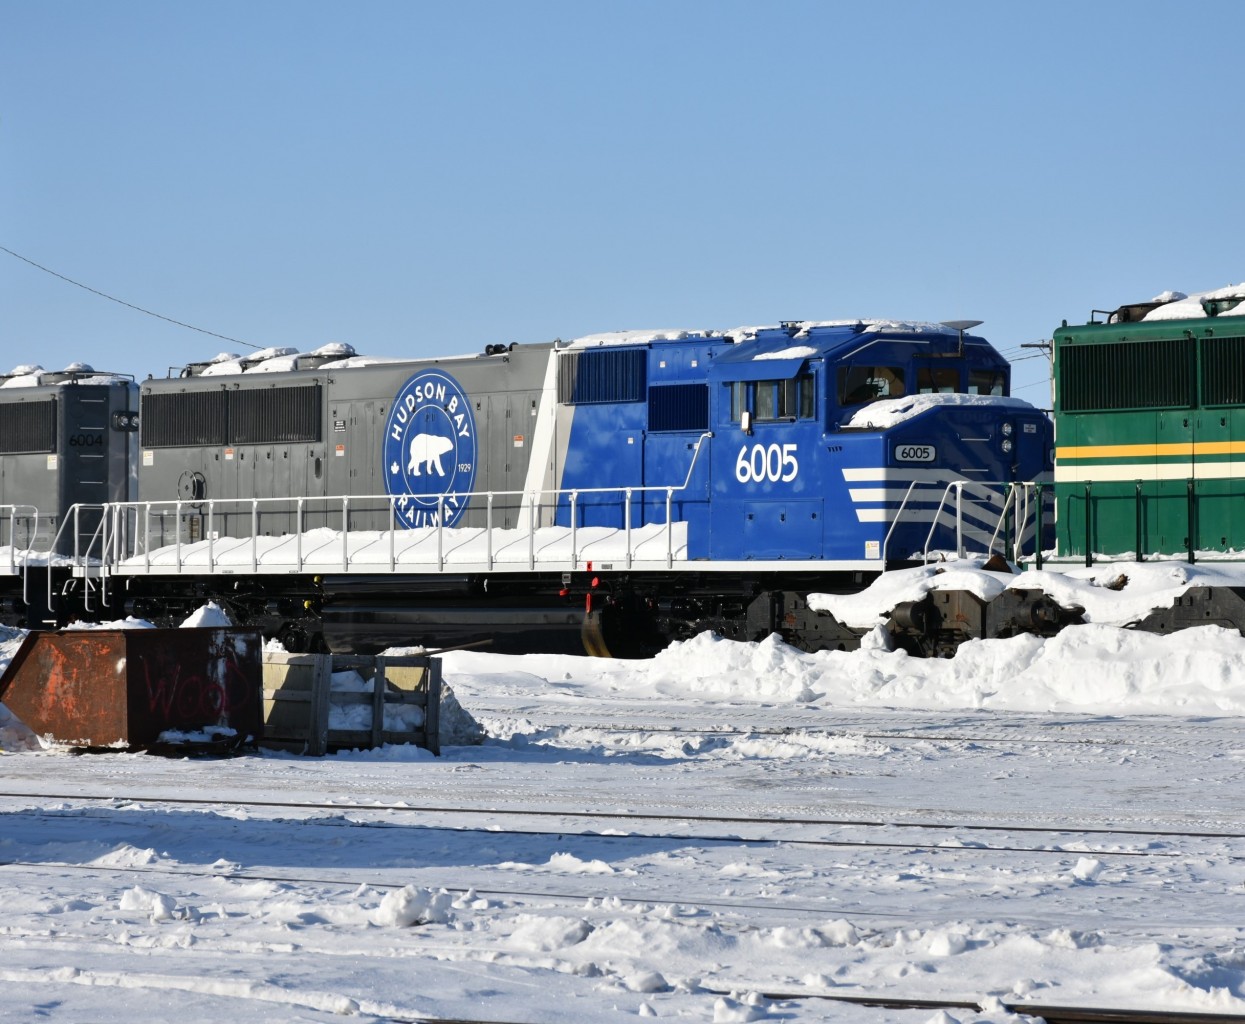 HBRY 6005 SD60M (ex-UP) sits sandwiched between HBRY 6004 & HBRY 5005 at HBR's The Pas, MB diesel shop yard on a sunny but bitterly cold March 16, 2023.